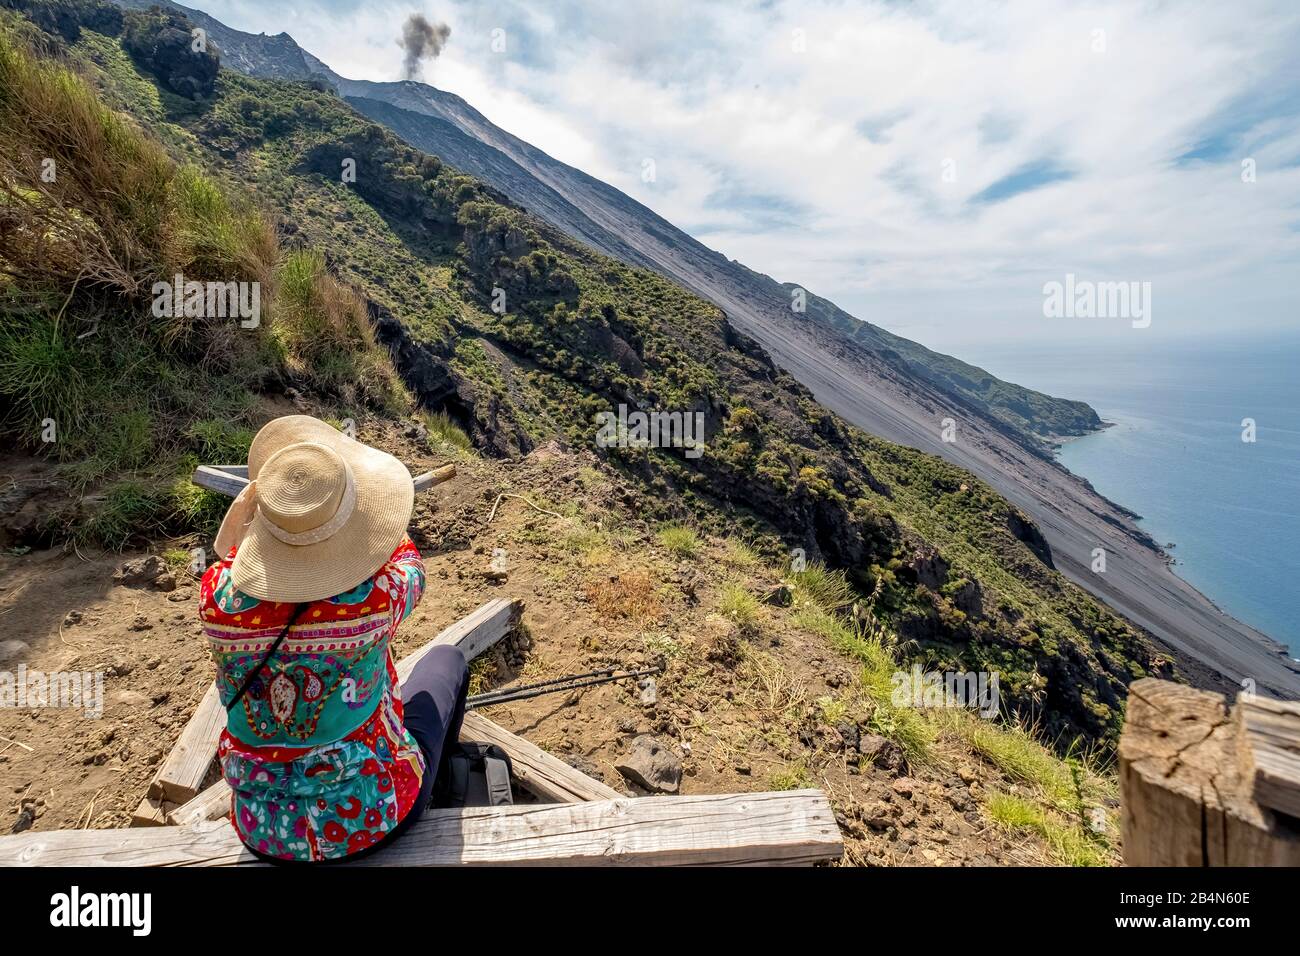 Rest at the Stromboli volcano with cloud of smoke, hiker, hiker, forest and volcanic ash, Lipari, Aeolian Islands, Aeolian Islands, Tyrrhenian Sea, Southern Italy, Europe, Sicily, Italy Stock Photo